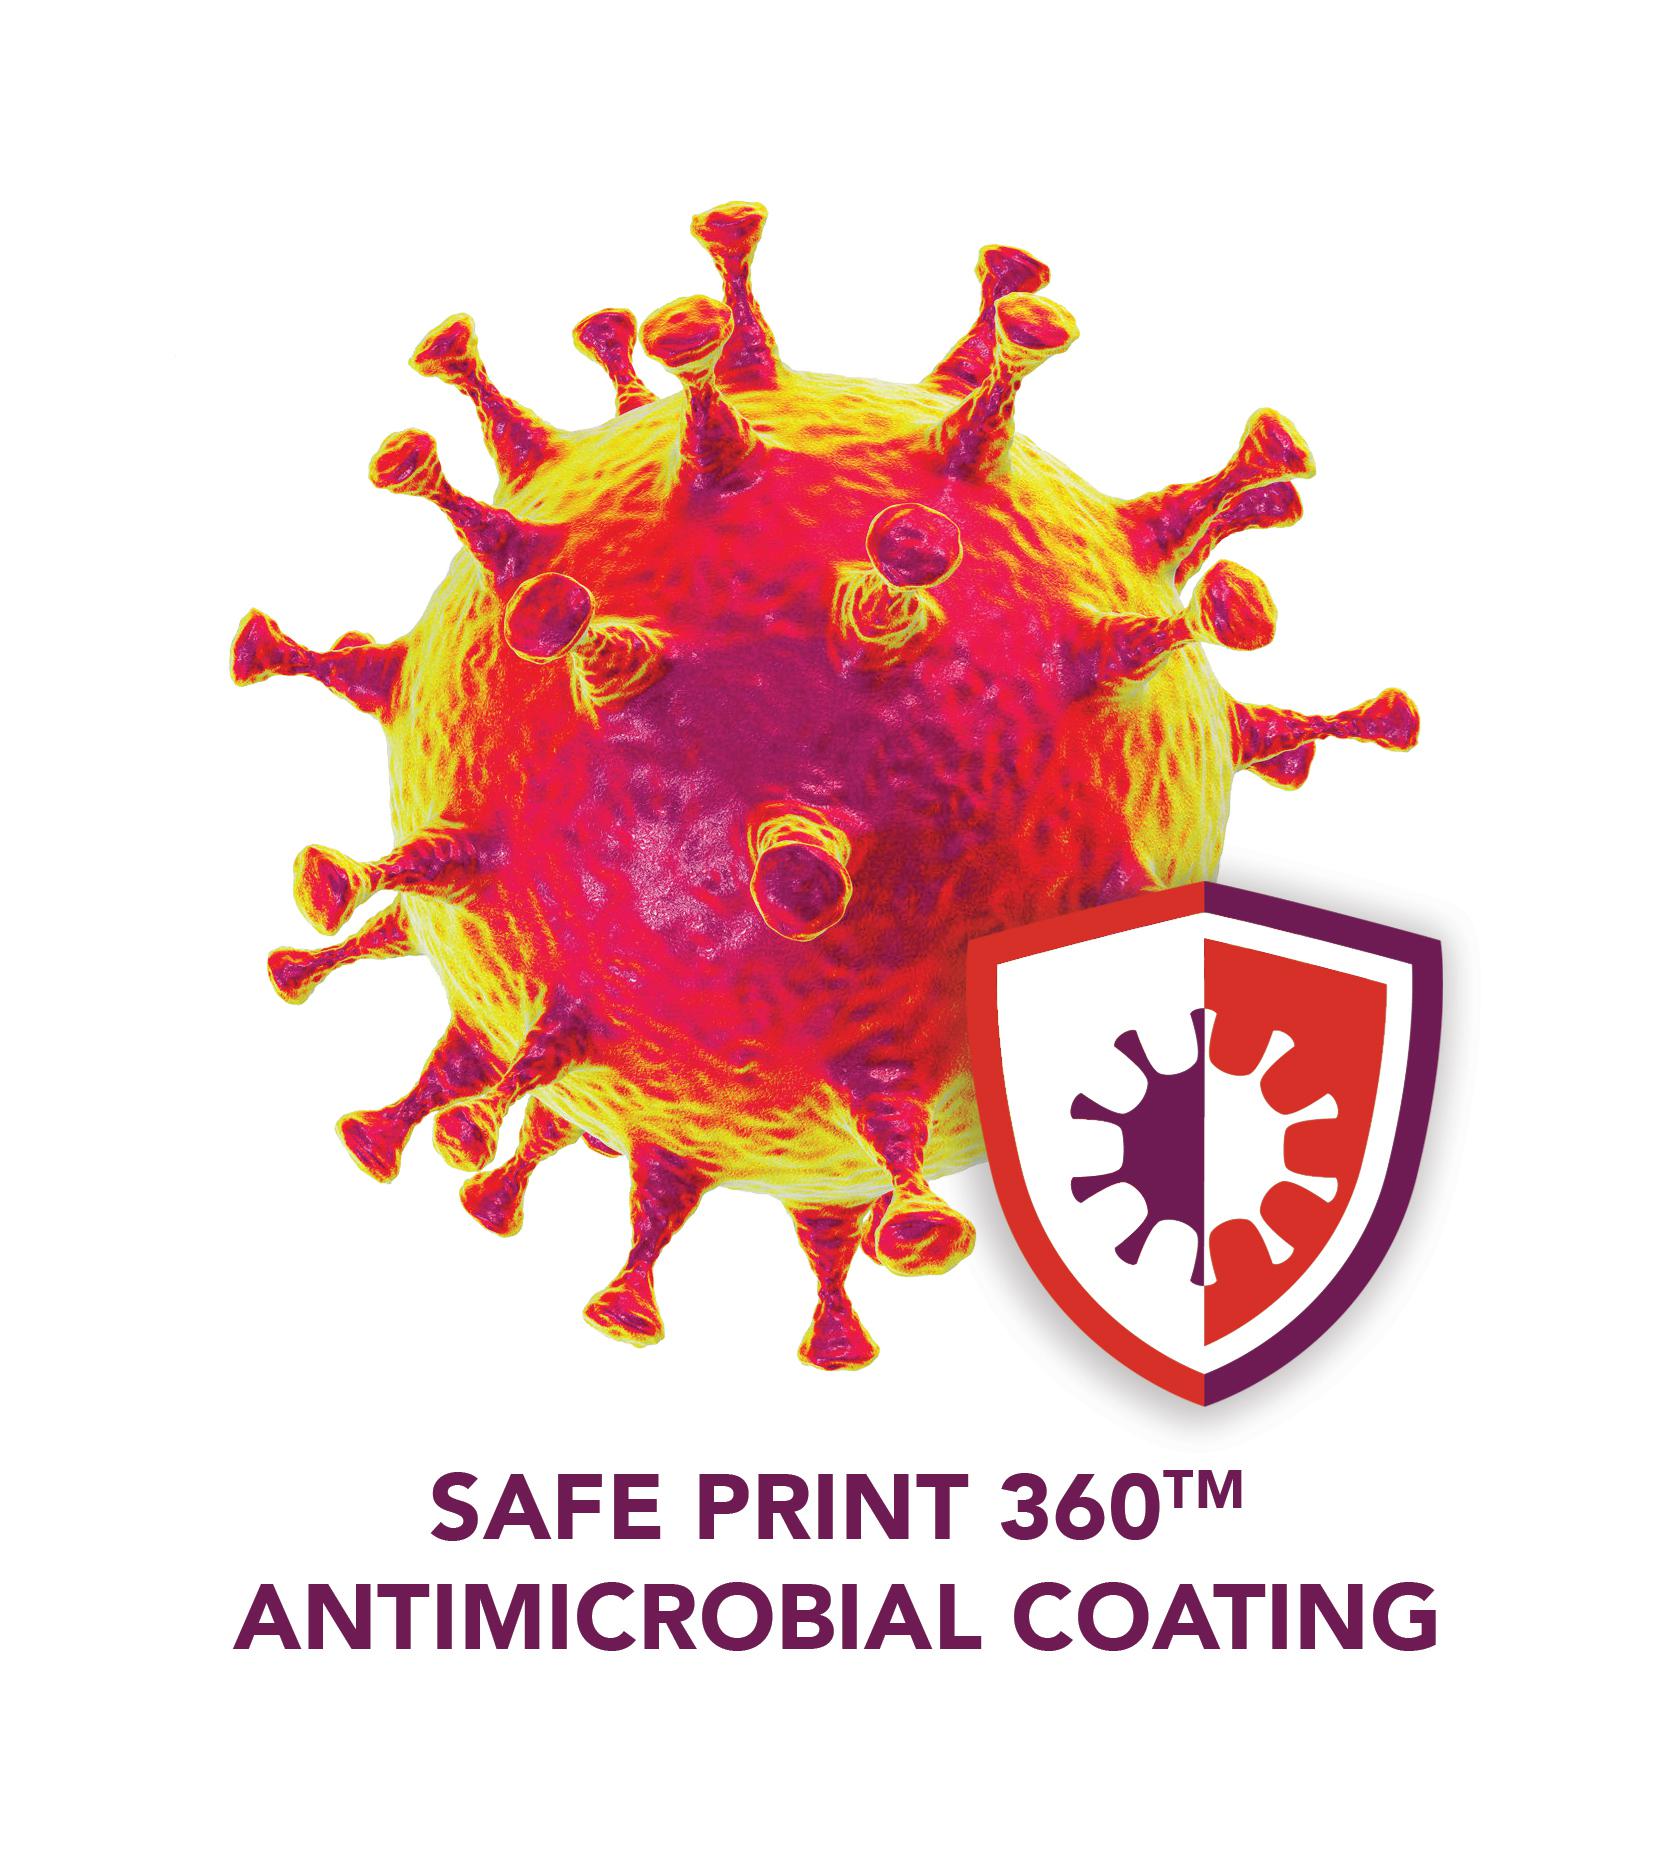 Safe Print 360 - Antimicrobial Substrate Coating - Protect your printed products with our bacterial growth inhibitor. For more information call 859.331.6636